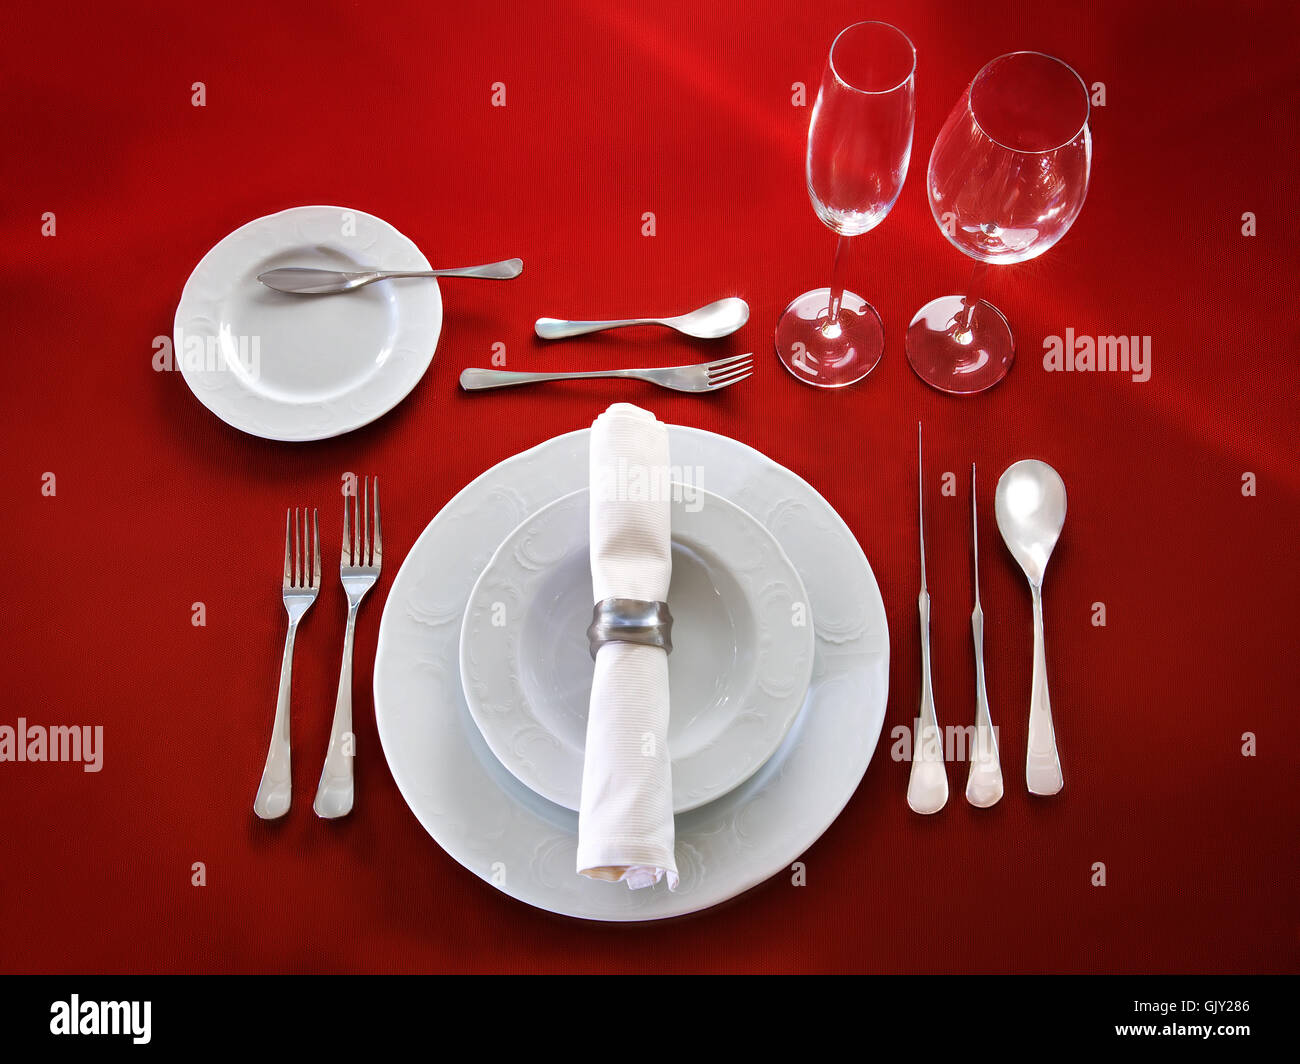 Perfect Table Setting On Red Cloth Background Stock Photo Alamy